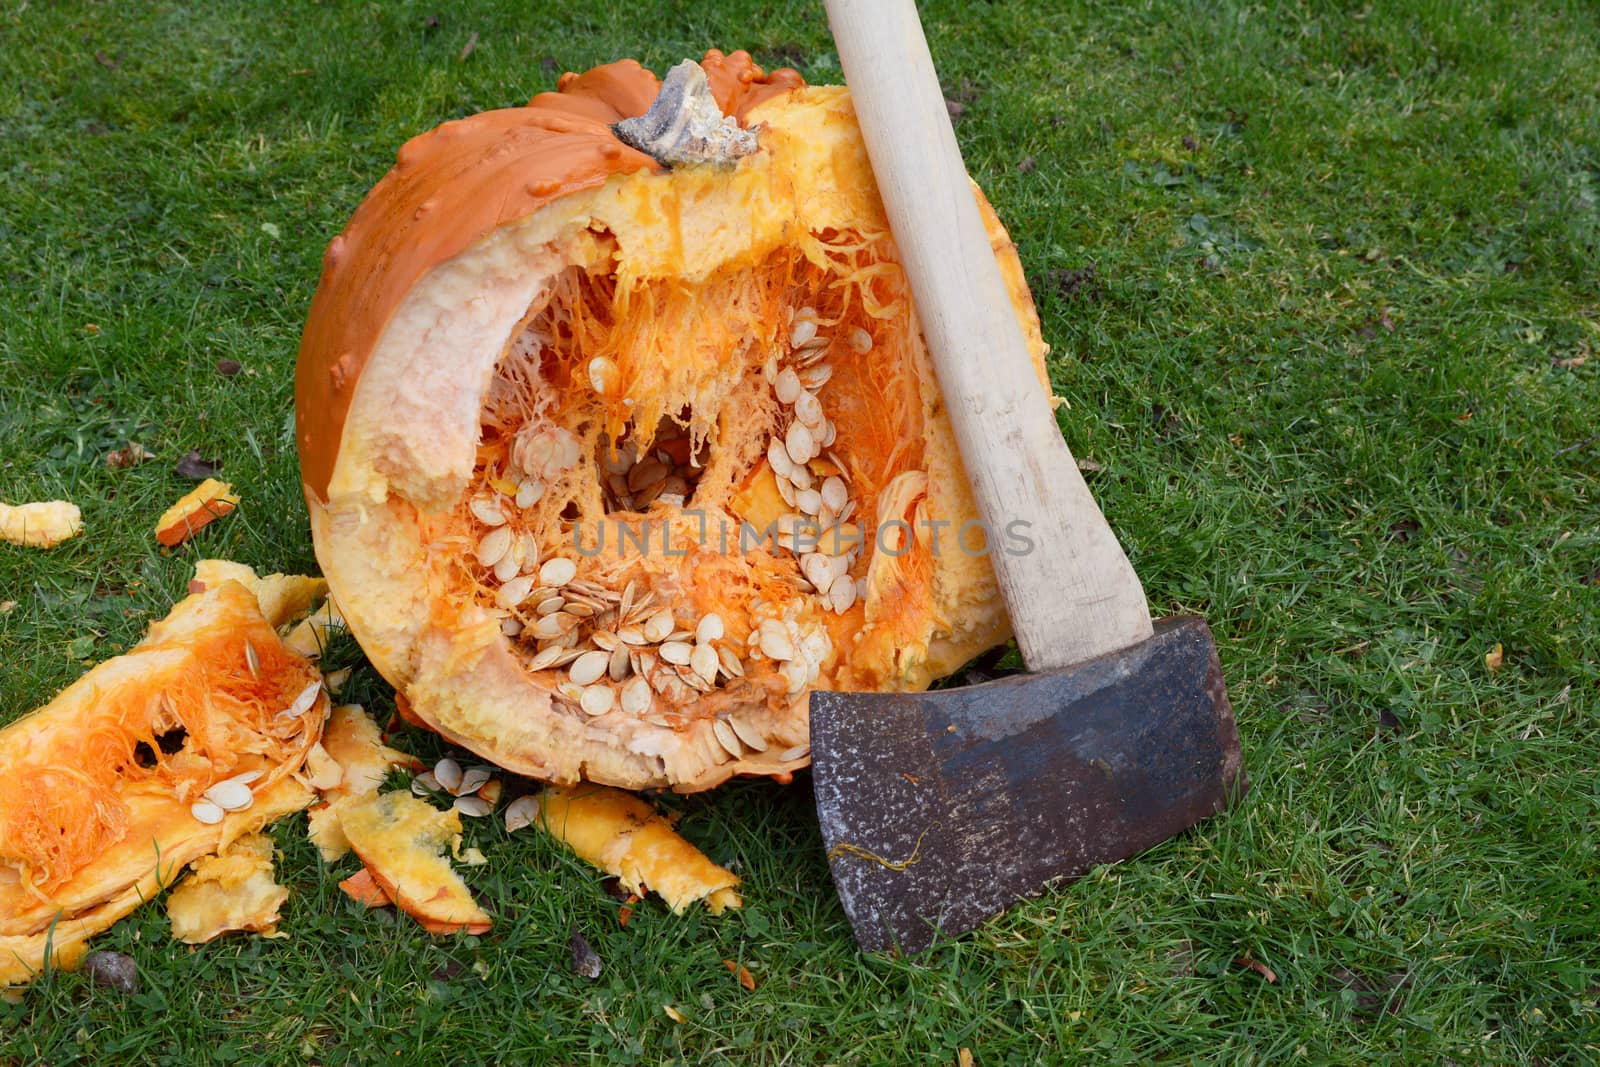 Long-handled axe against a warty orange pumpkin, with lumps of flesh and seeds spilled on grass